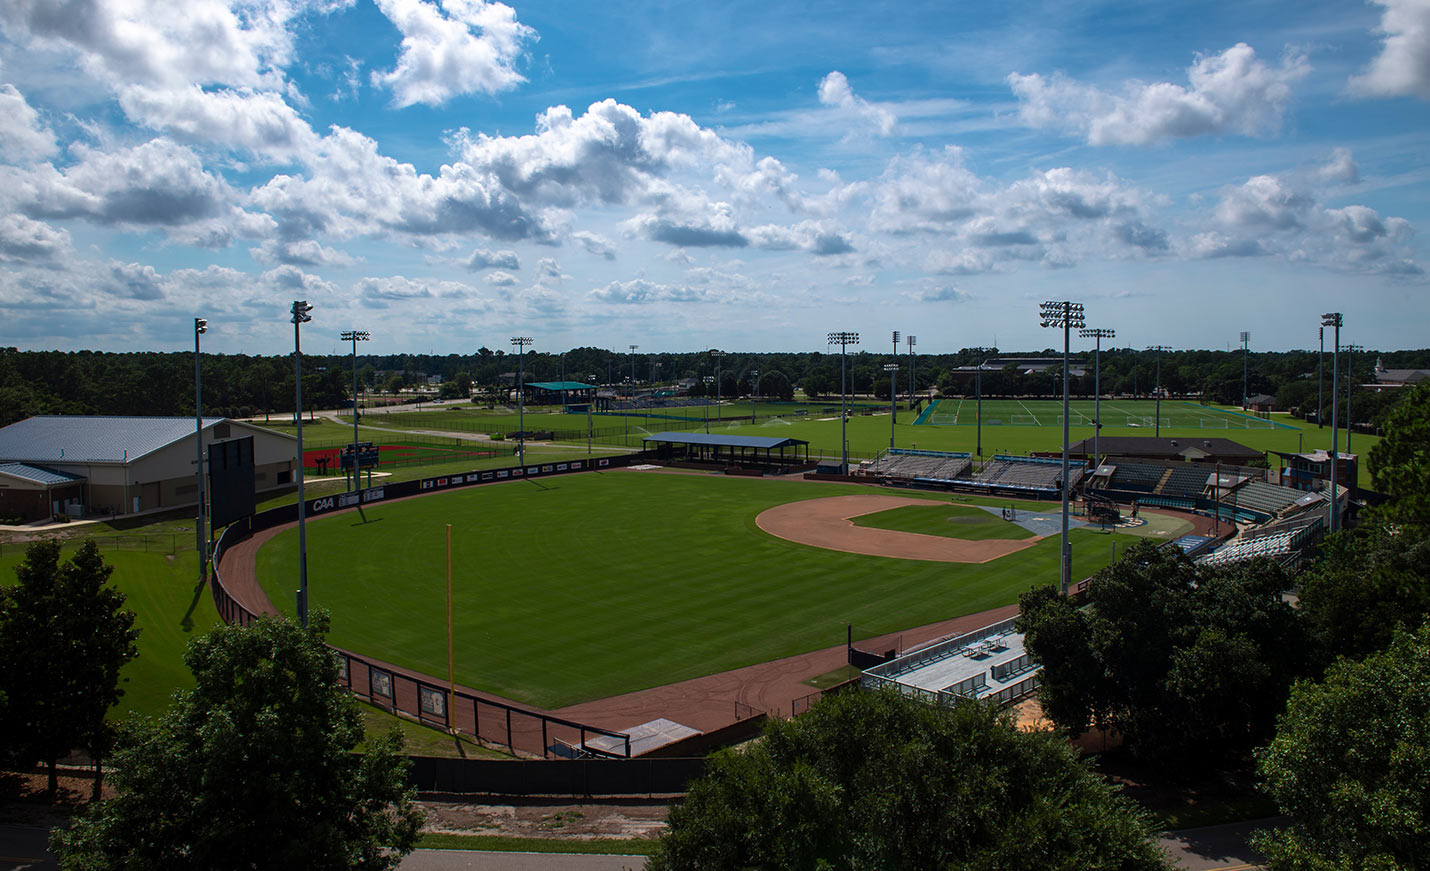 An aerial view of the baseball field on UNCW's campus.